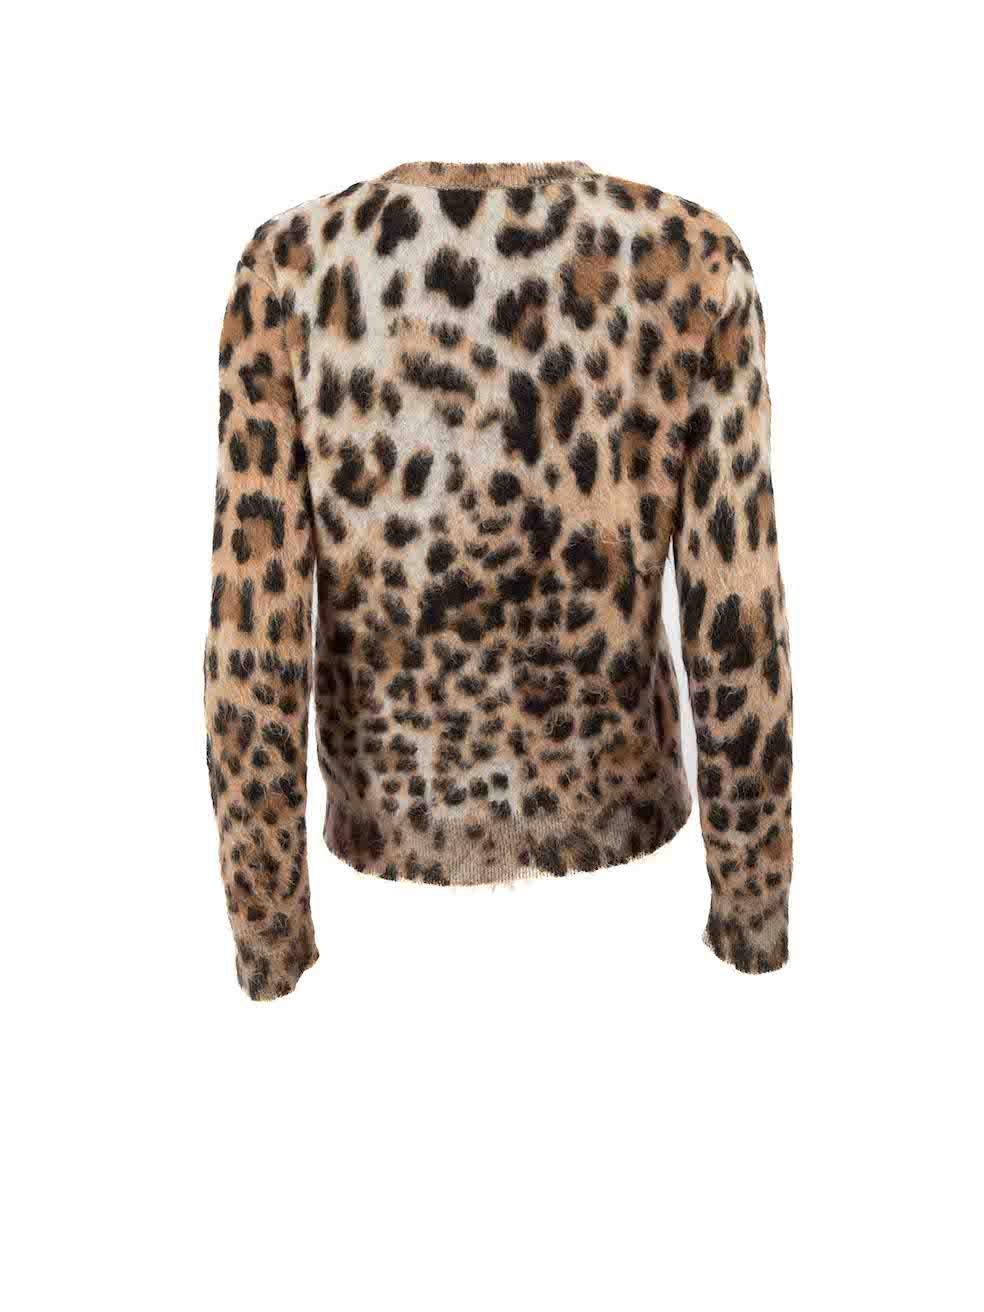 Saint Laurent Brown Mohair Leopard Jumper Size S In Good Condition For Sale In London, GB